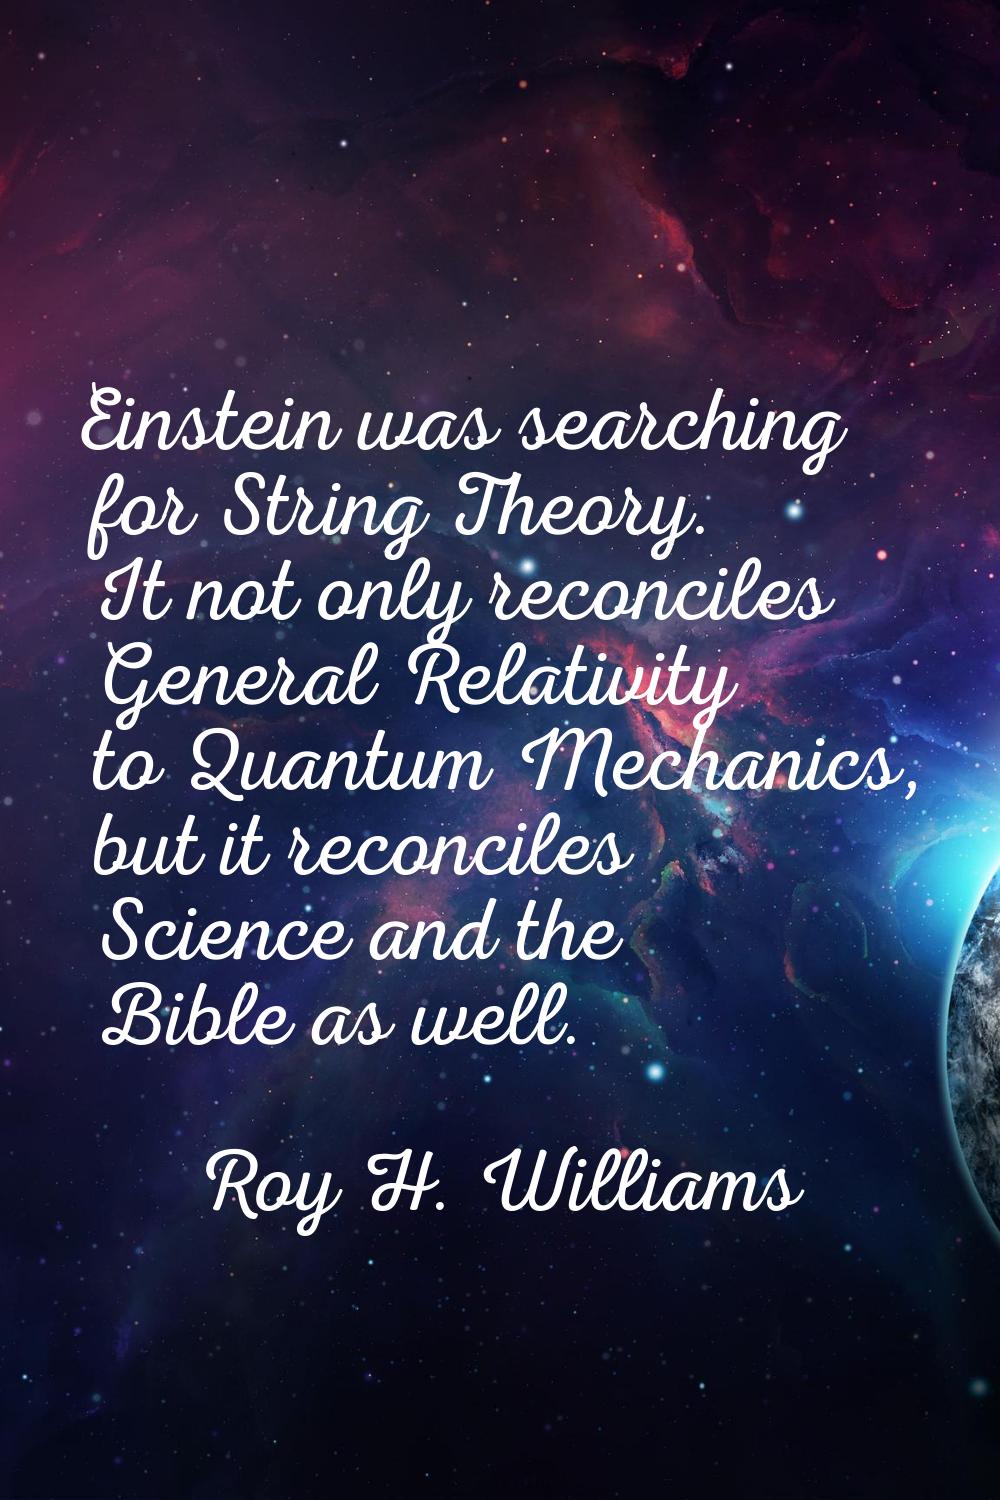 Einstein was searching for String Theory. It not only reconciles General Relativity to Quantum Mech